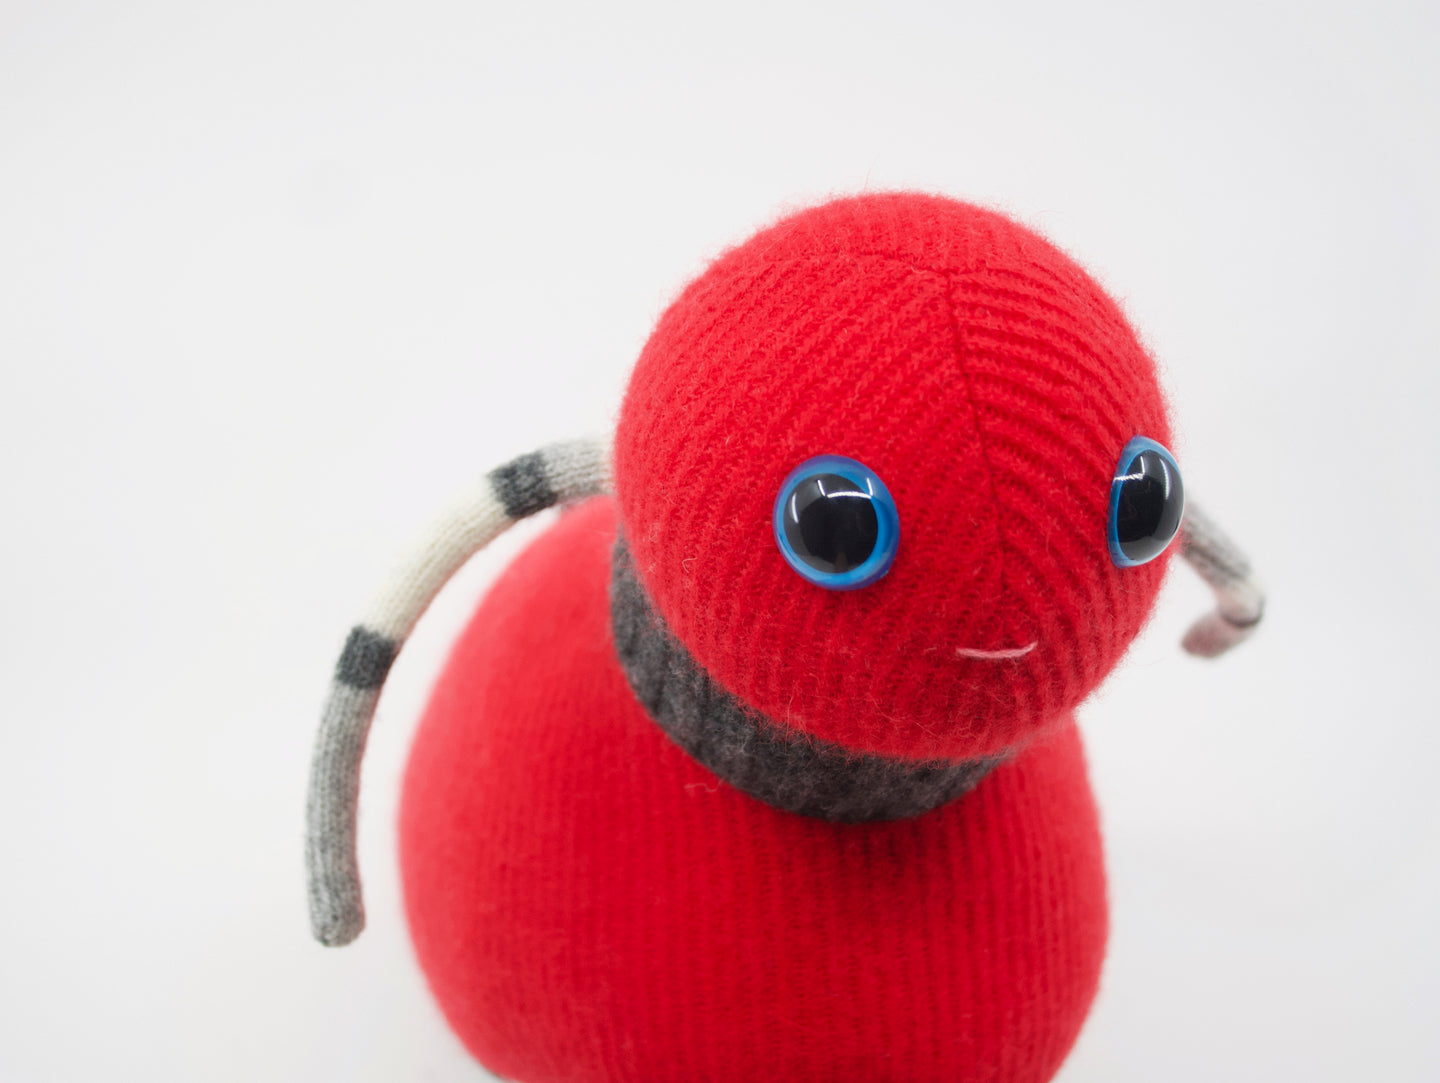 adorable red stuffed animal with blue eyes